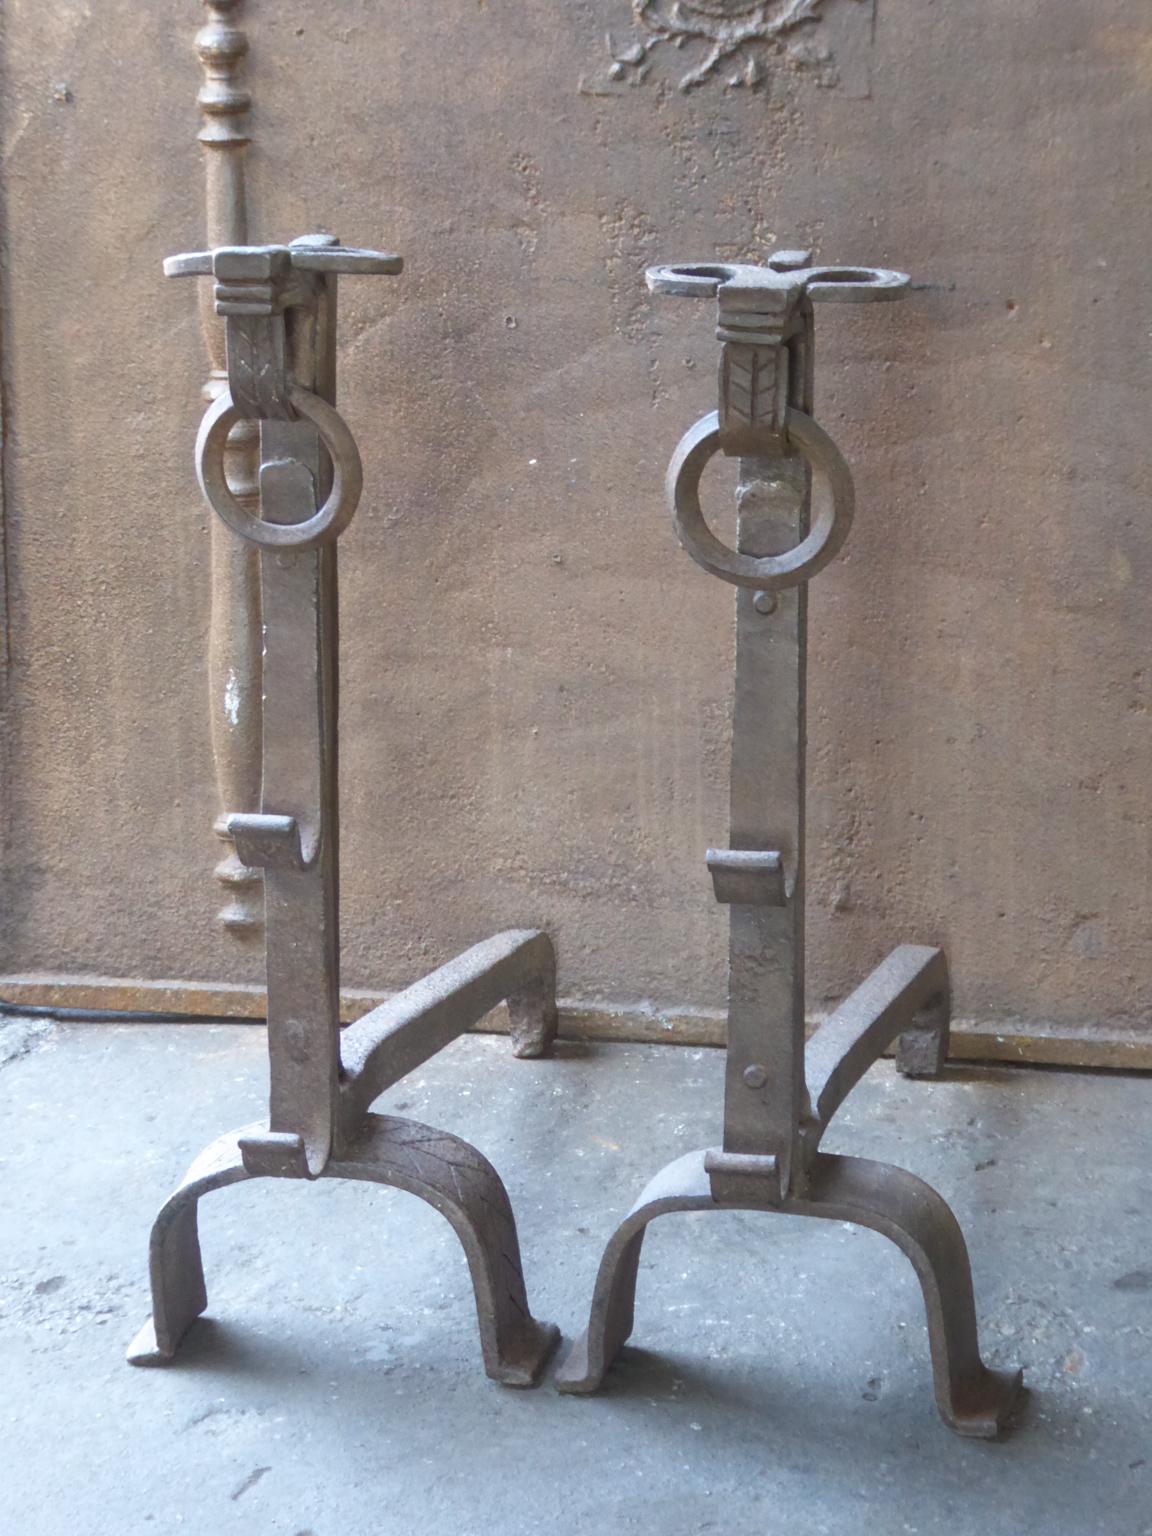 17th century French andirons made of wrought iron. The style of the andirons is Gothic. The tops of the andirons have the shape of a bulls head. The andirons have spit hooks to grill food. They are in a good condition.